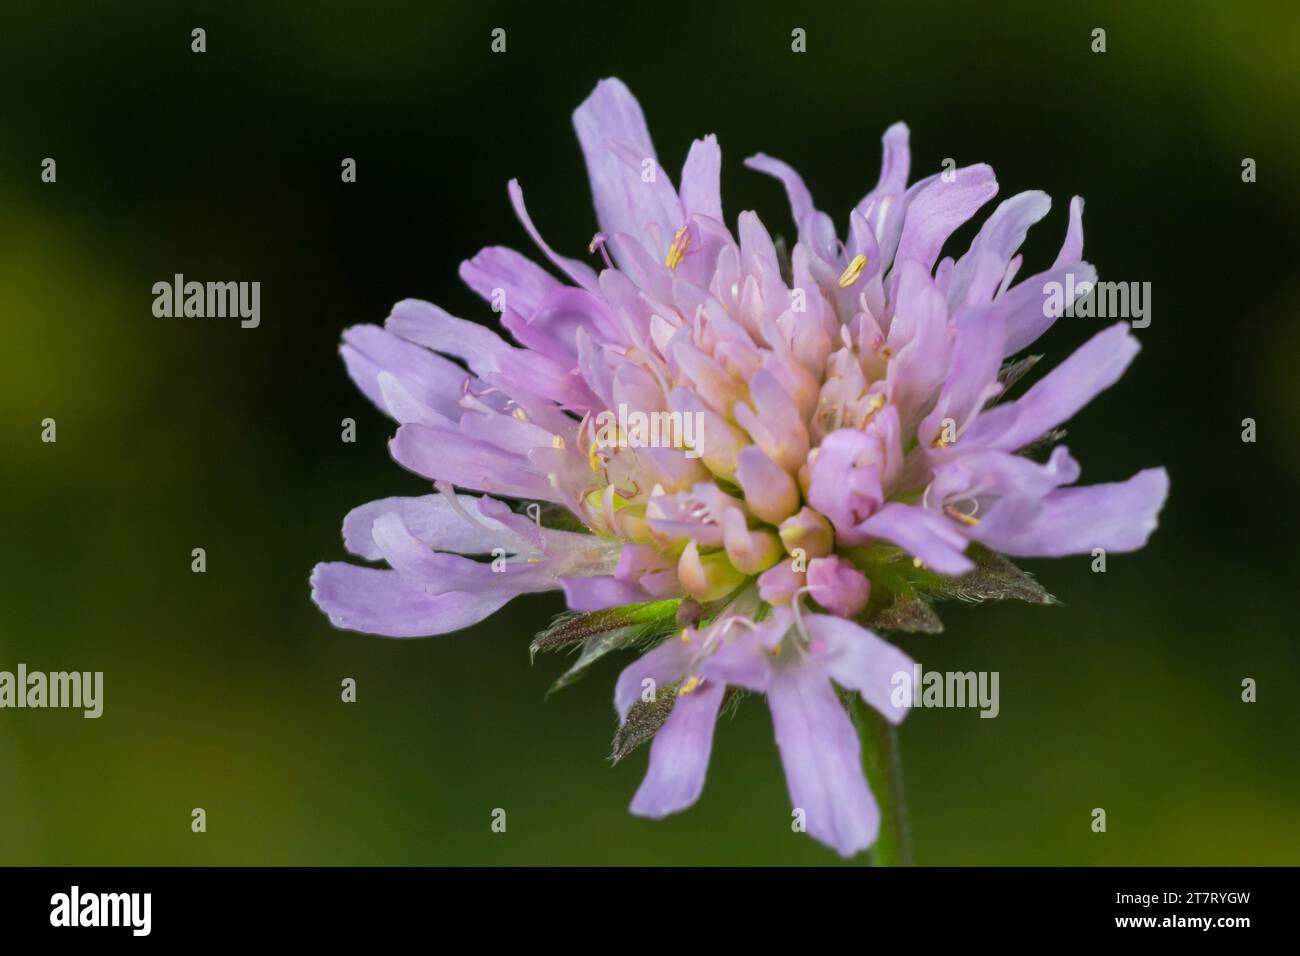 Beautiful single flower of the field scabious Knautia arvensis, close-up view on the green blurred background. Stock Photo